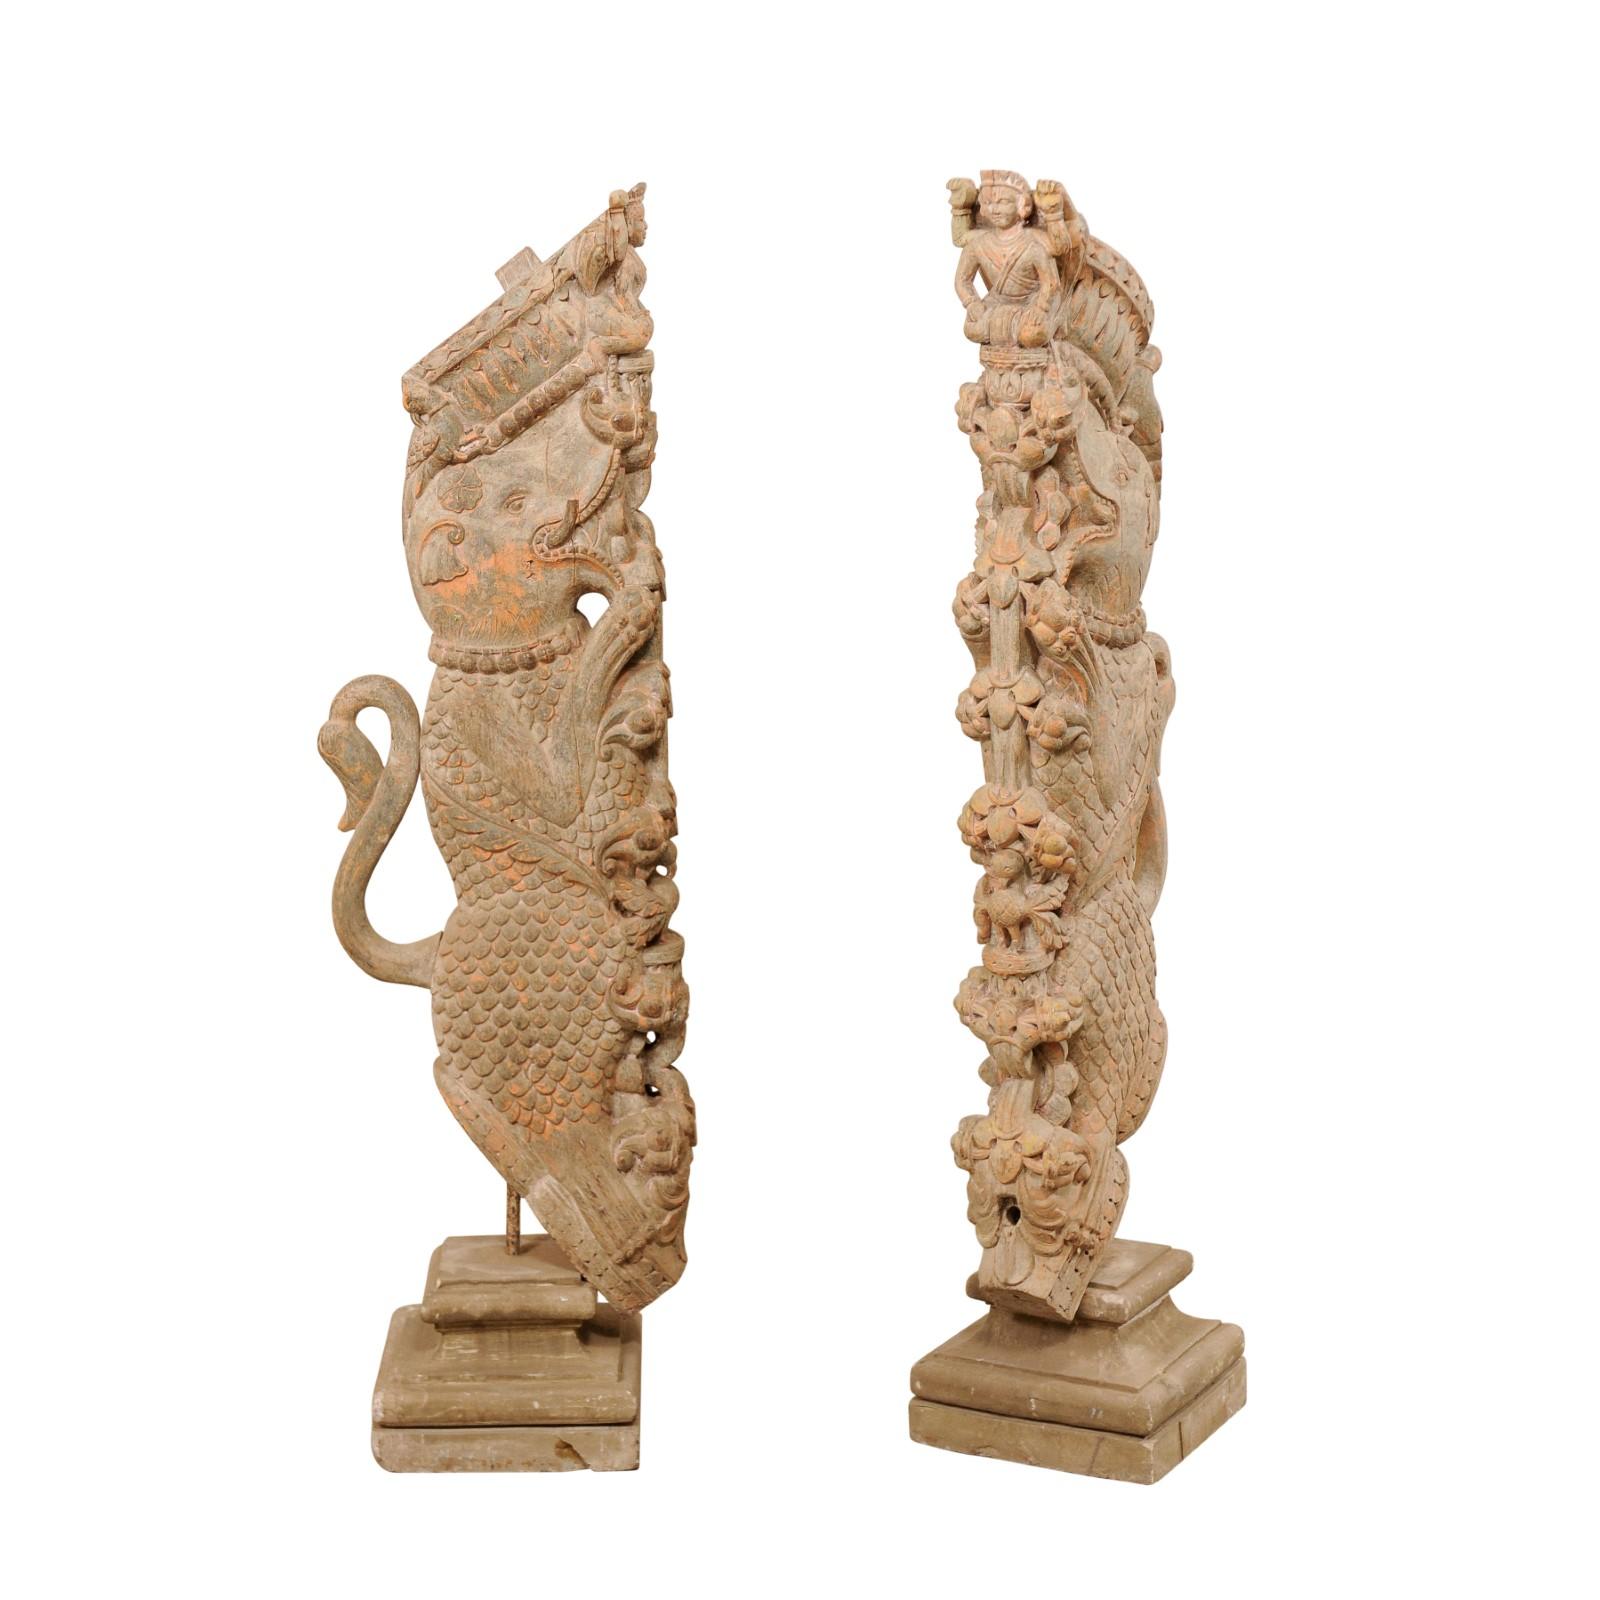 Exquisite Pair of 19th Century Hand Carved Hindu Temple Struts, South India